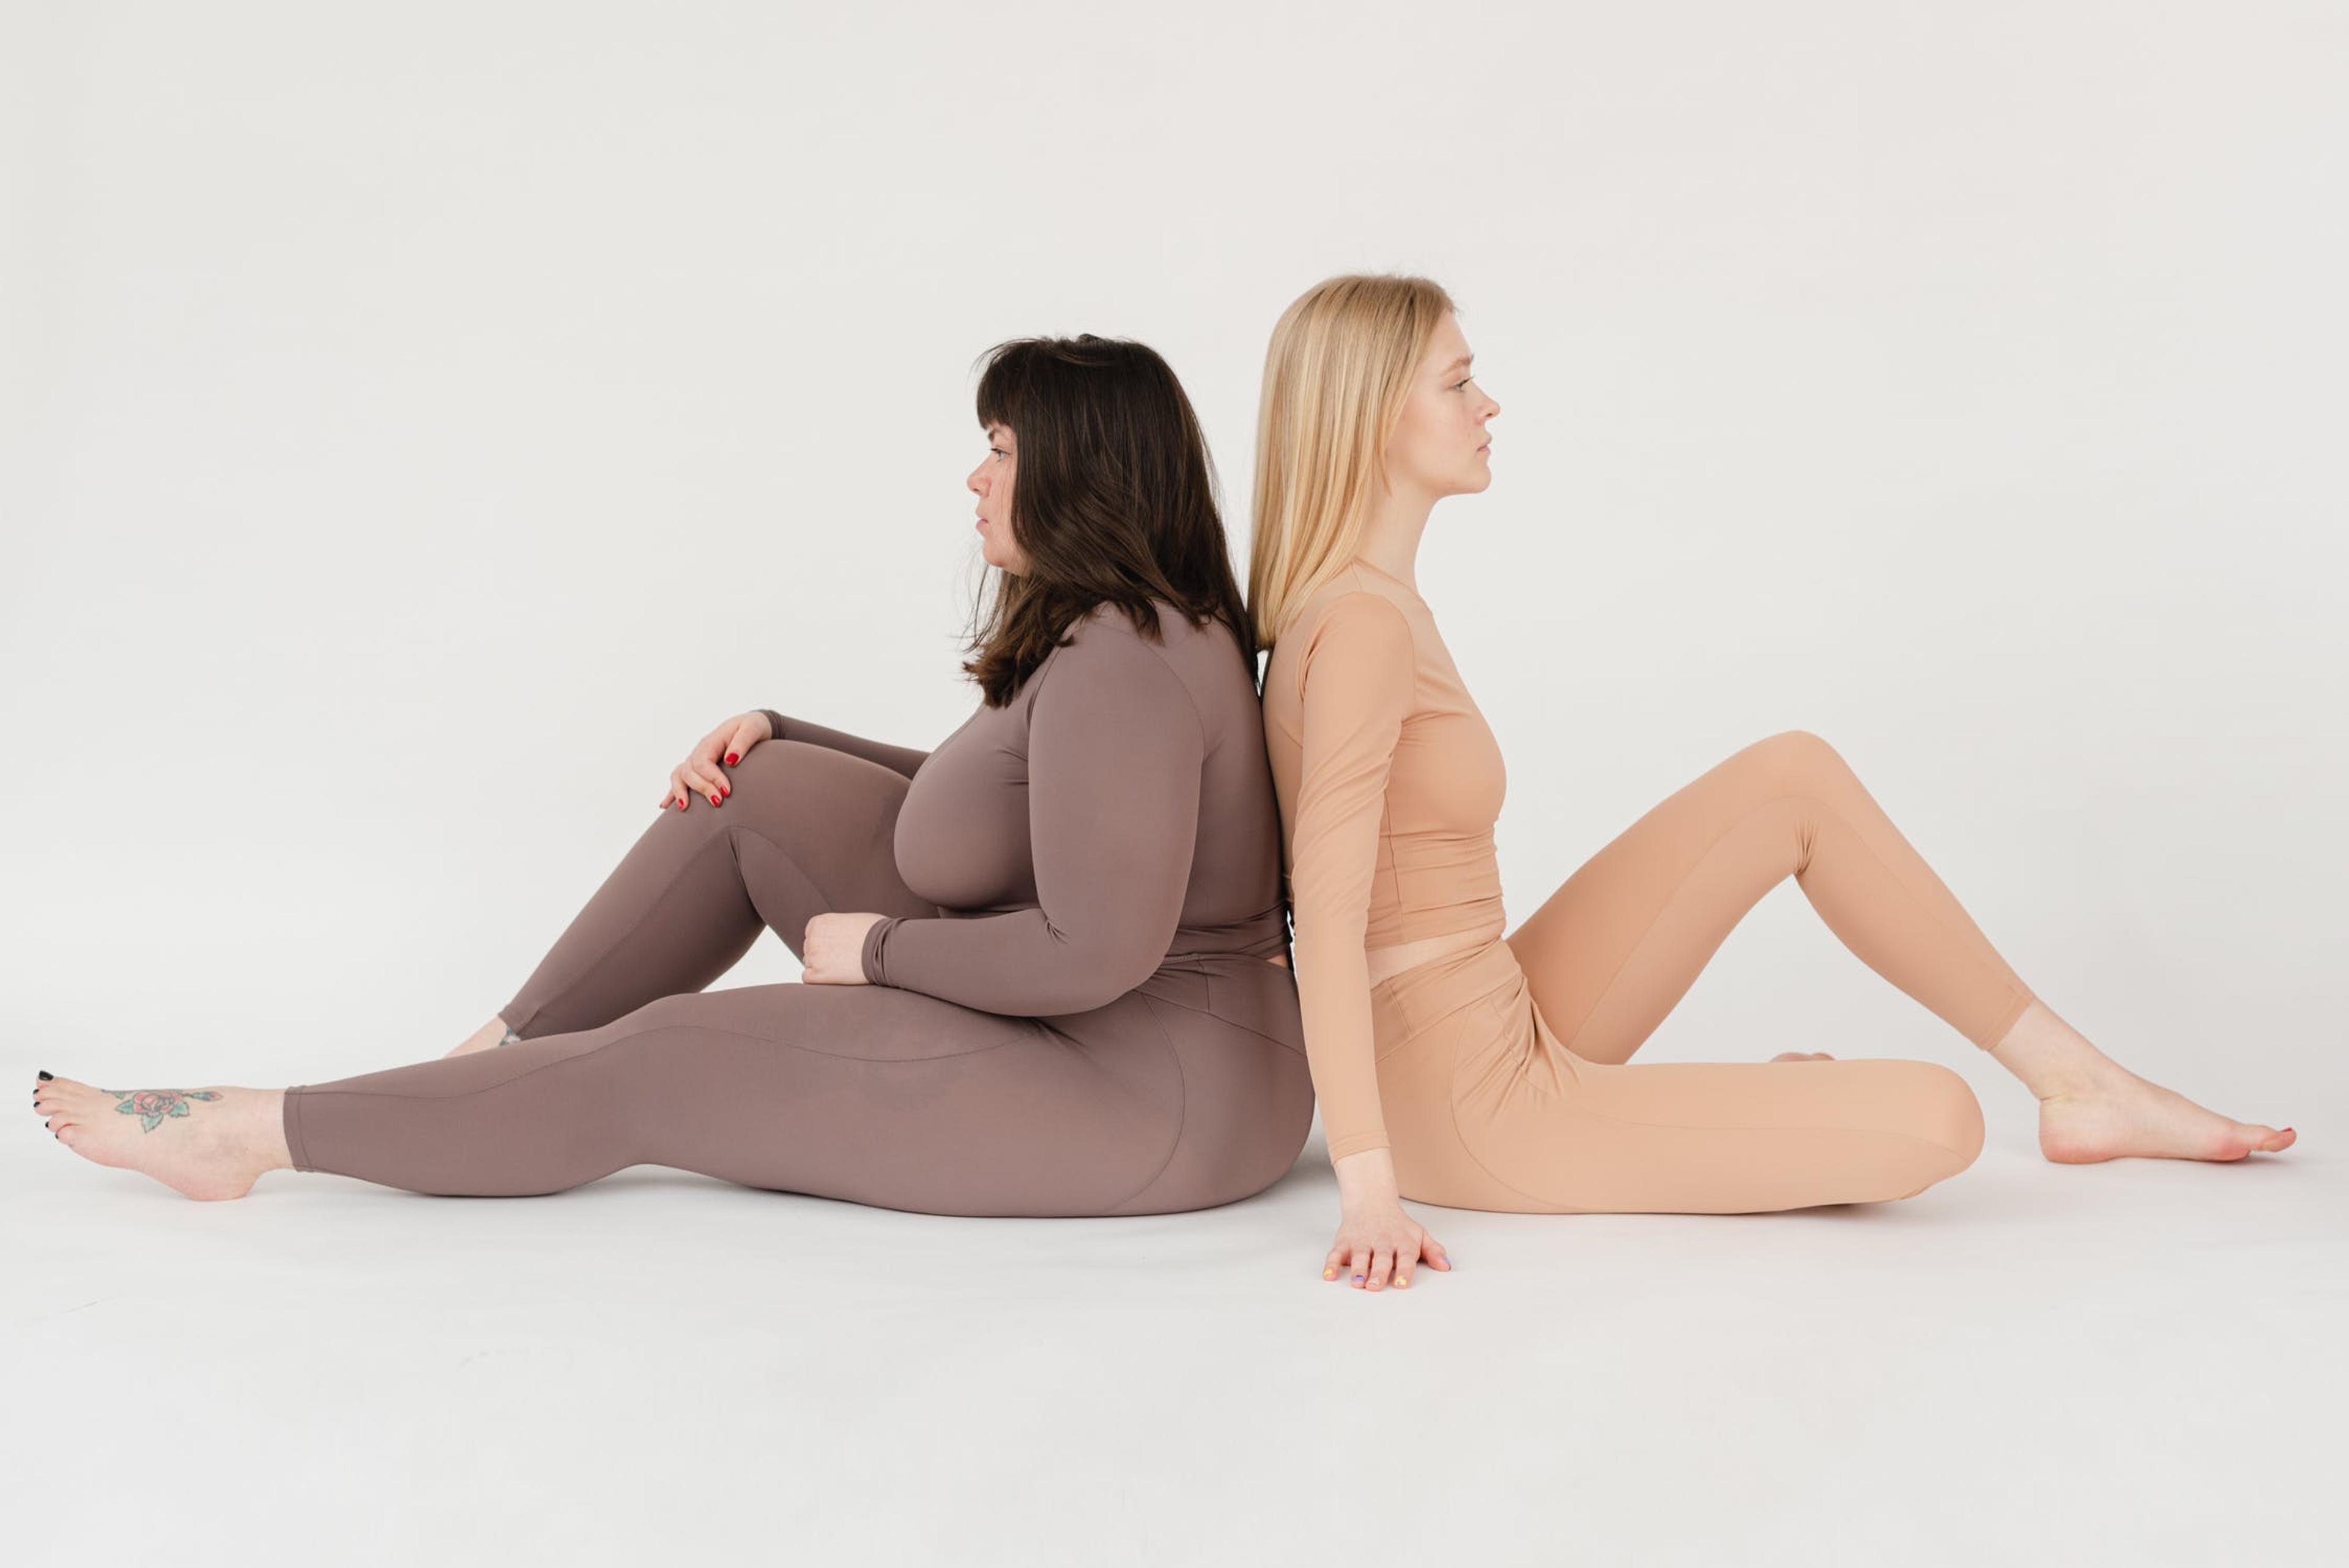 Two women with noticeably different body shapes and sizes sit back-to-back